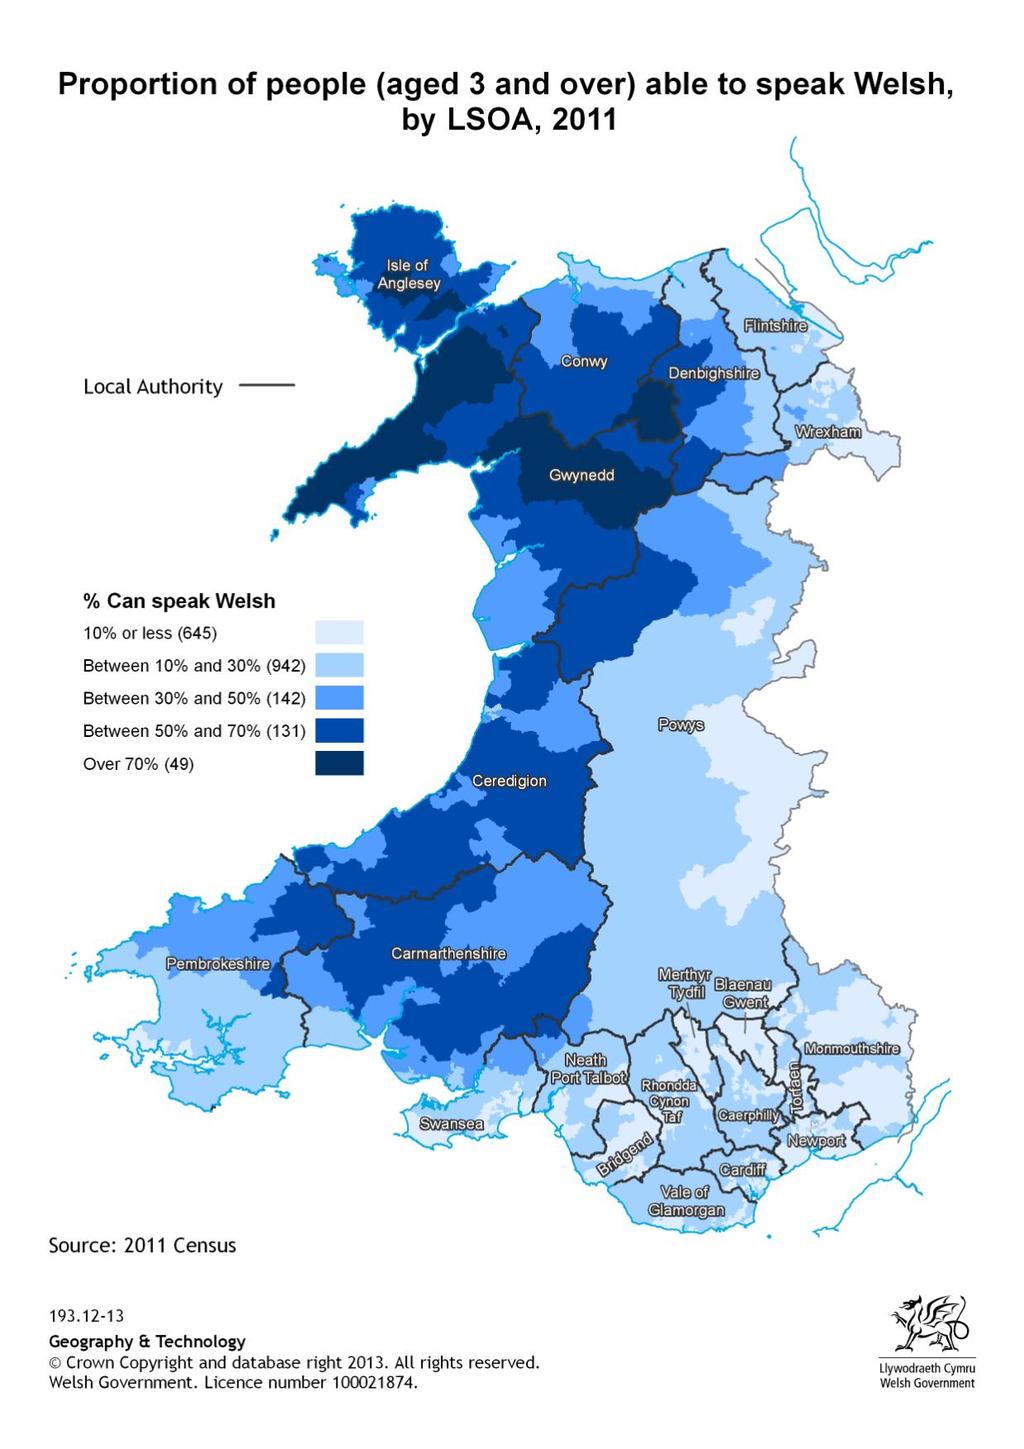 8.11 As stated above, the 2013-14 Welsh Language Use Survey and the National Survey itself gave